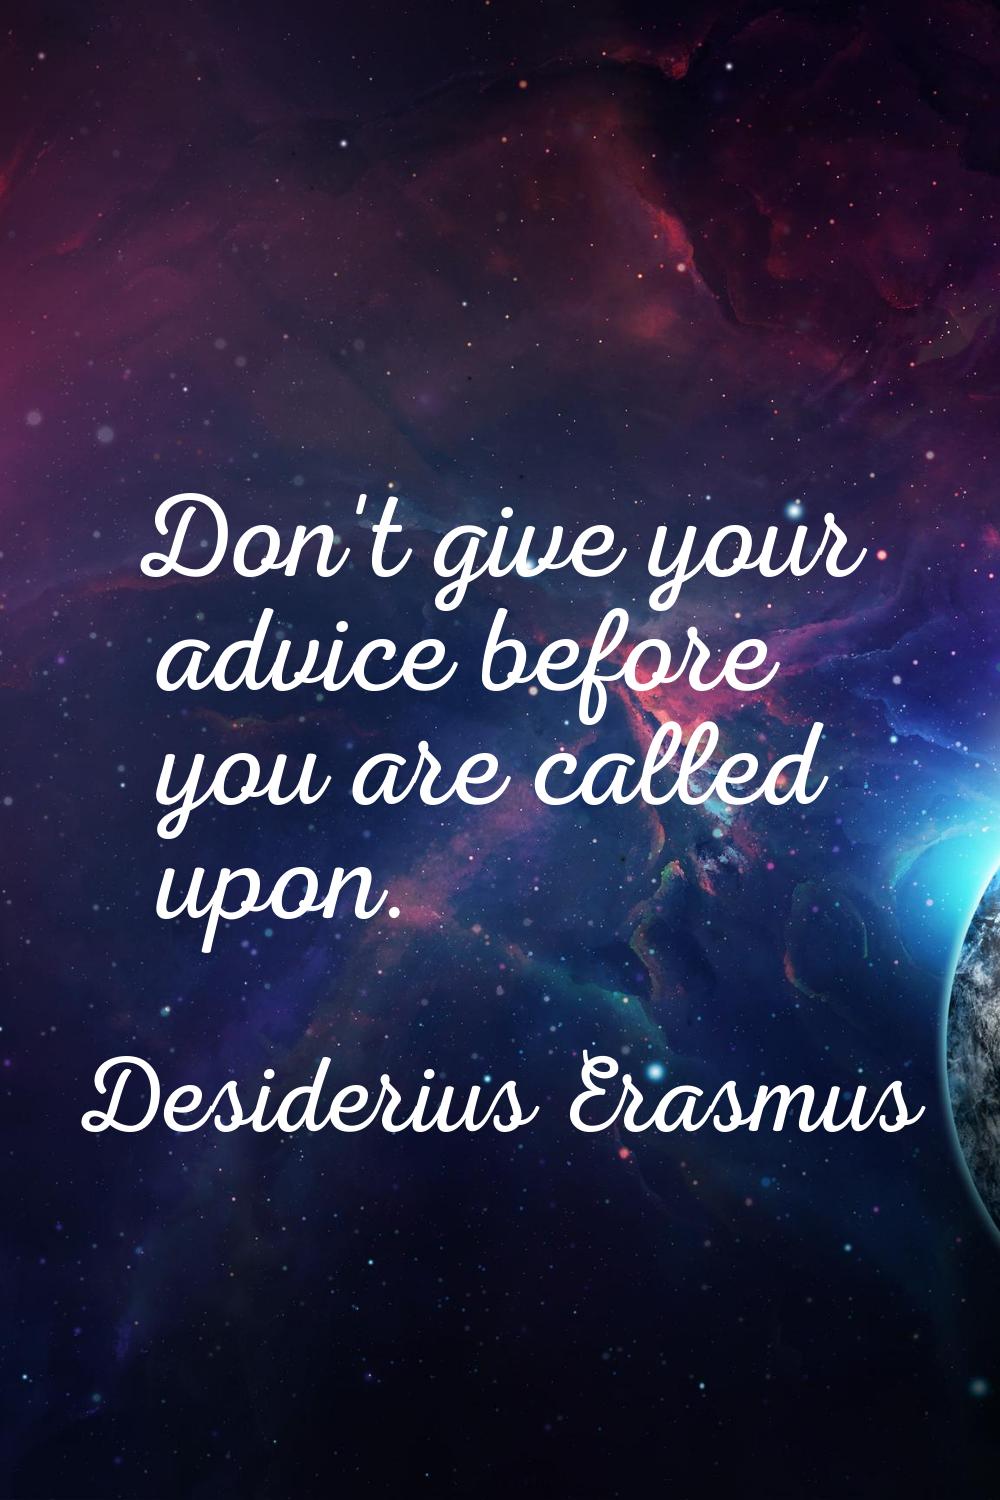 Don't give your advice before you are called upon.